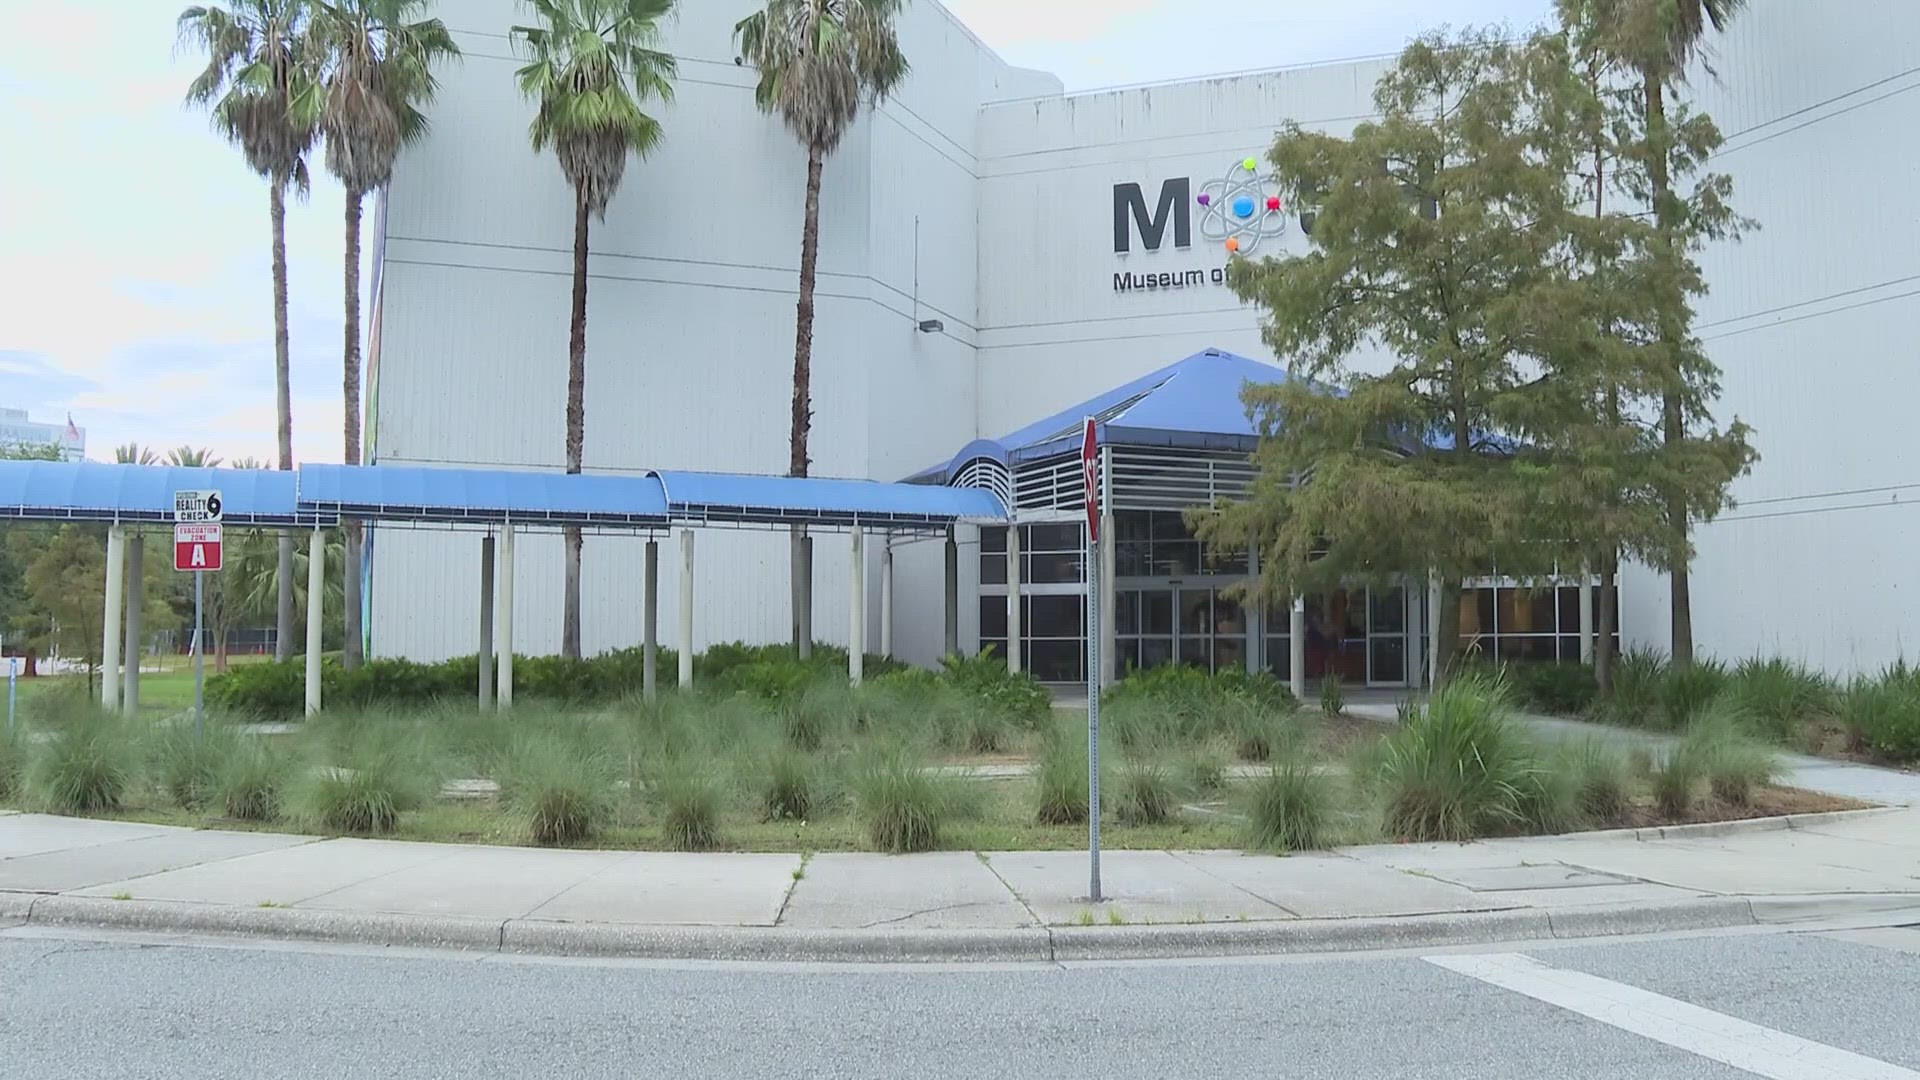 MOSH has been located in Jacksonville's Southbank for more than 50 years. The CEO said it's time expand.